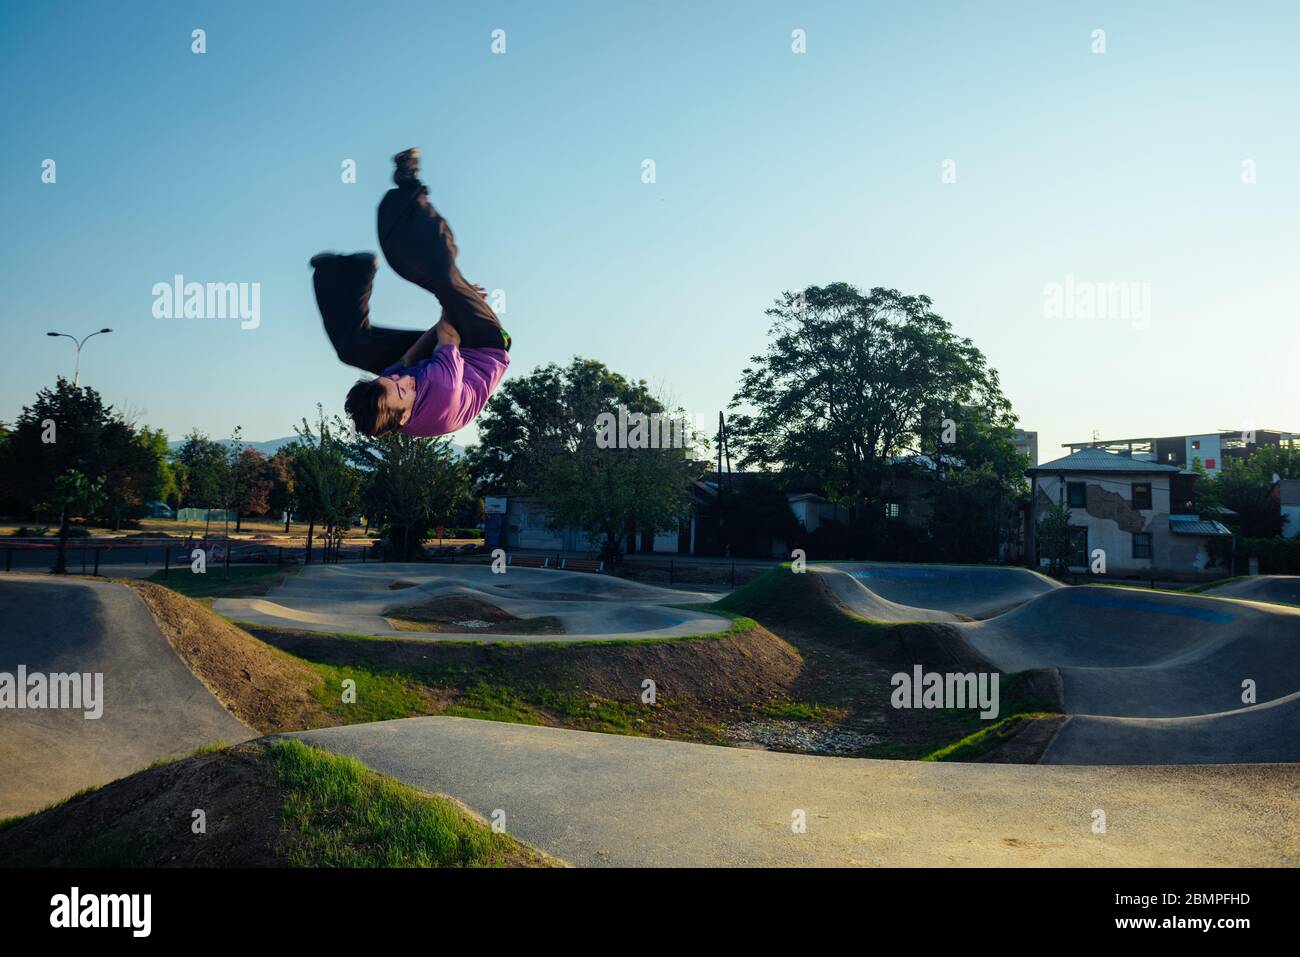 Athletic person during a side flip salto move in the air at the city skate  playground Stock Photo - Alamy